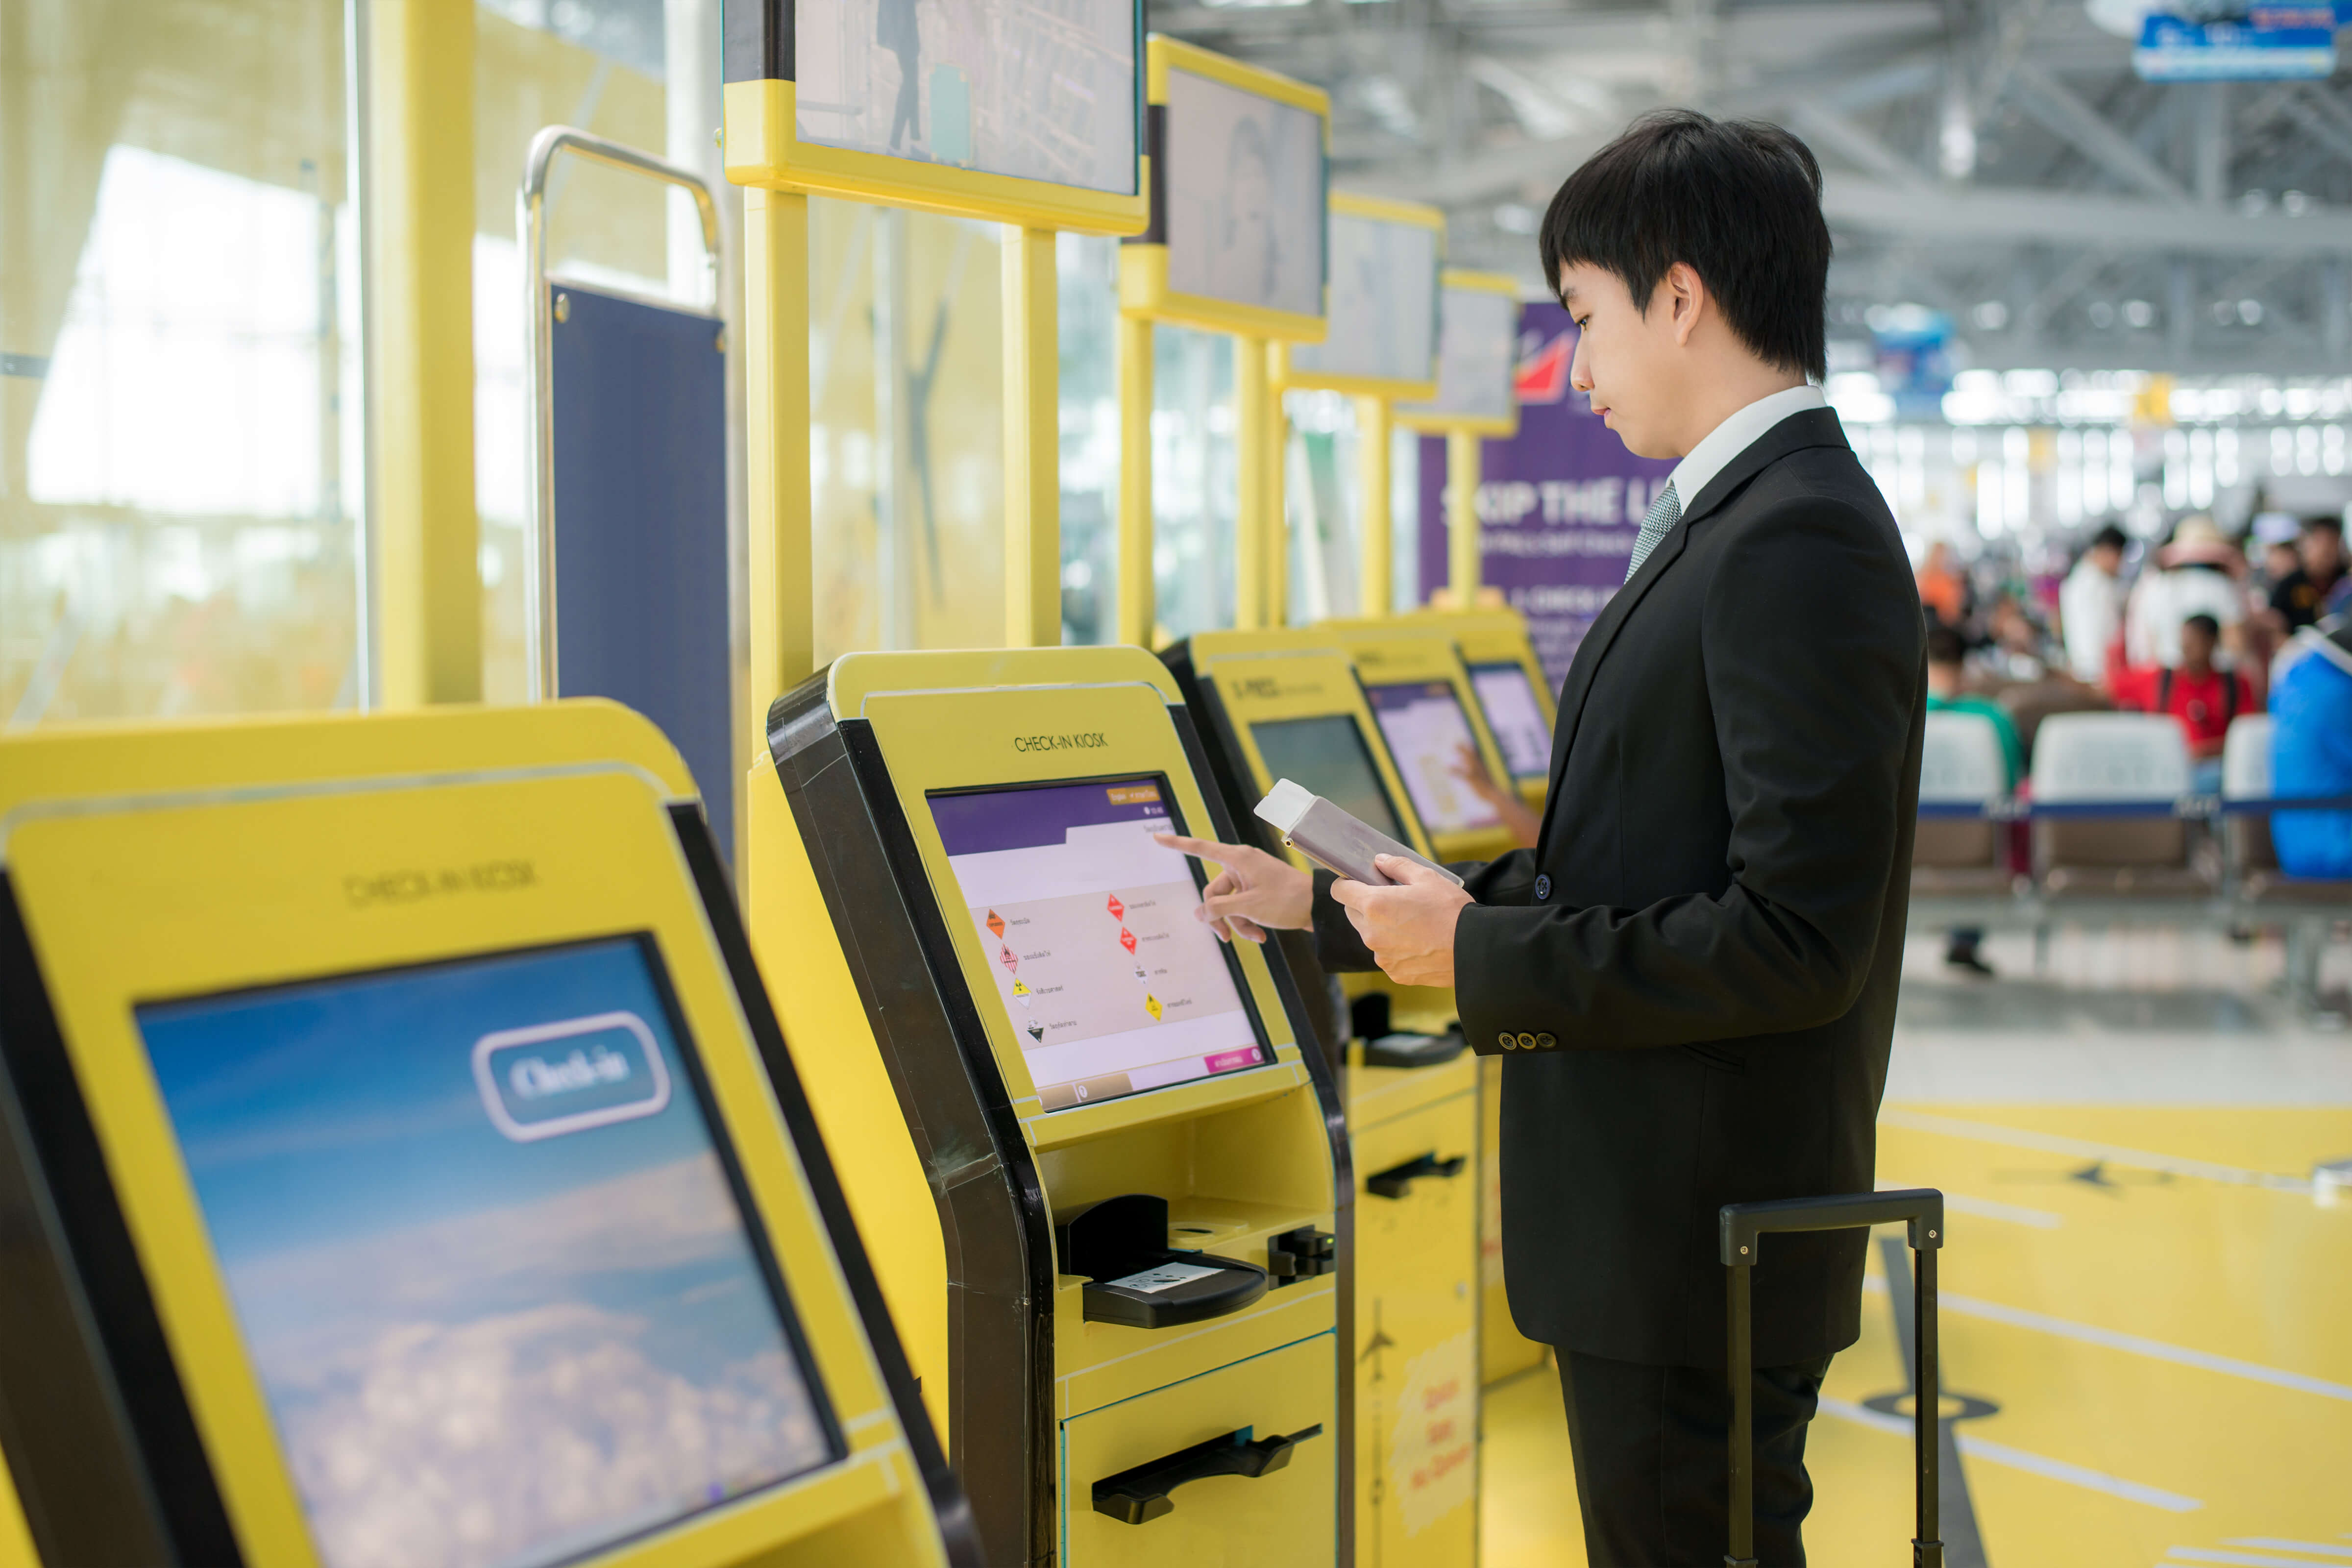 Self service airport check in kiosk with man holding passport